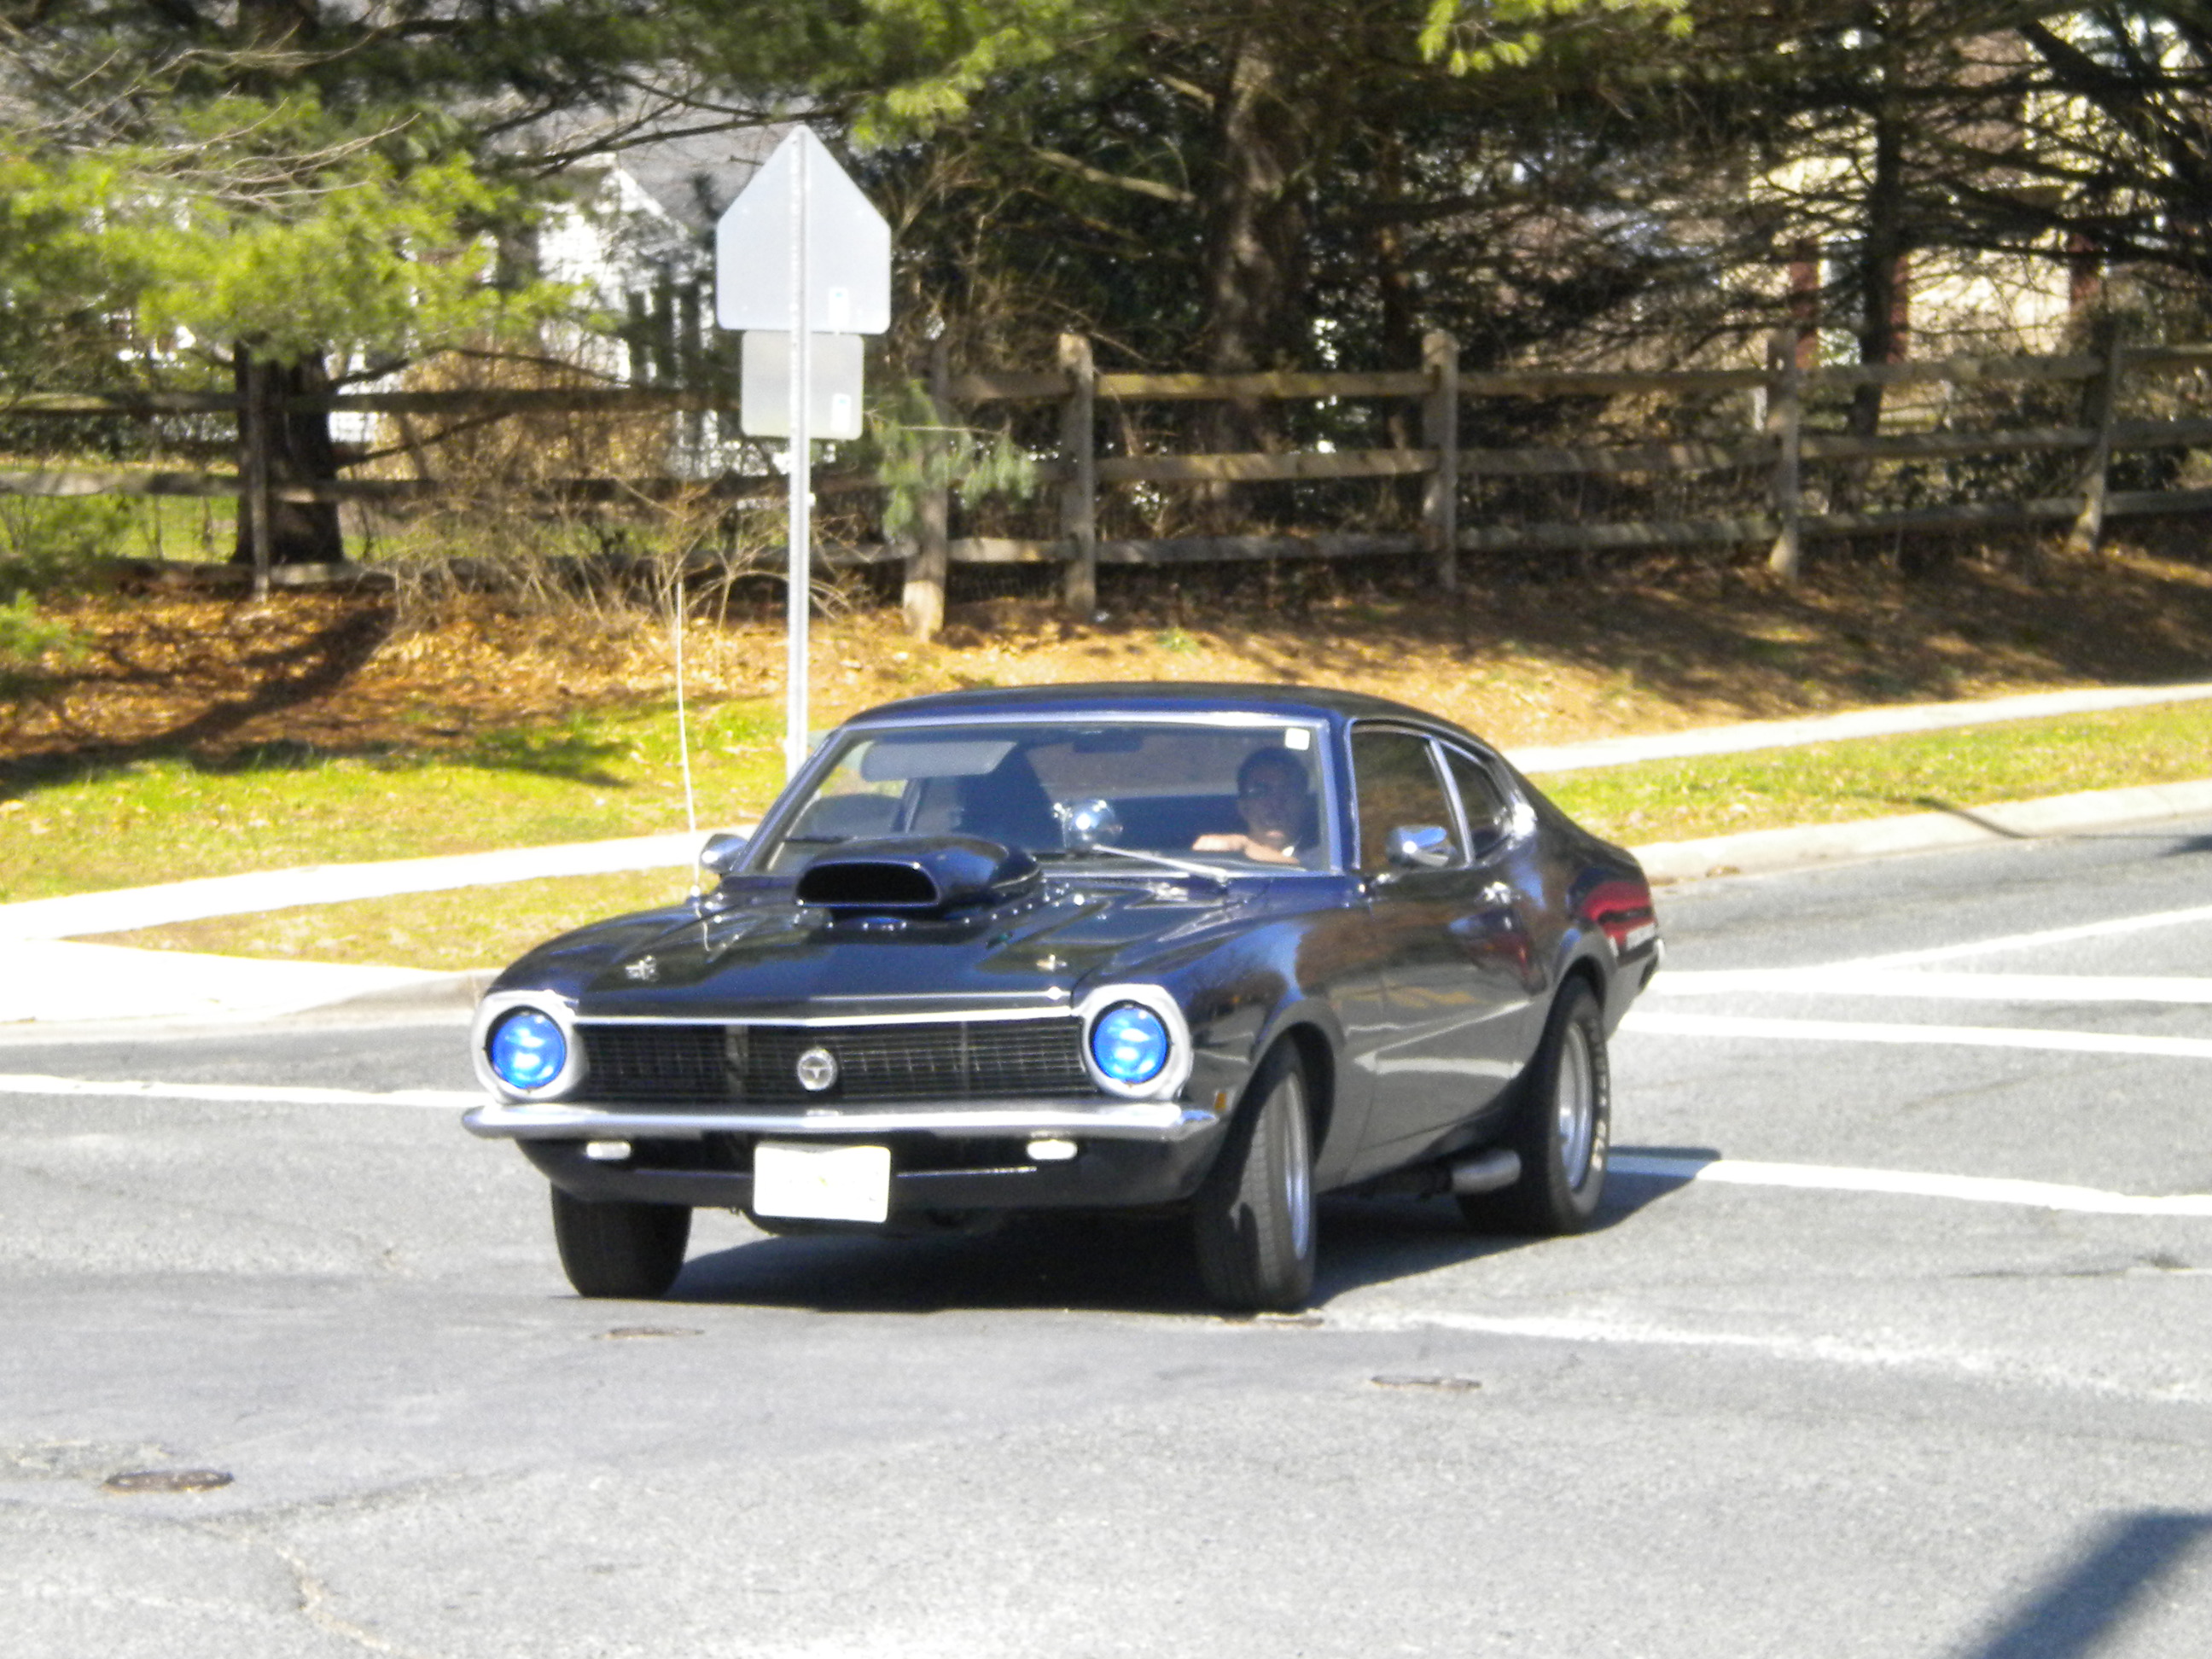 FORD MAVERICK muscle classic hot rod rods gs wallpaper 2592x1944